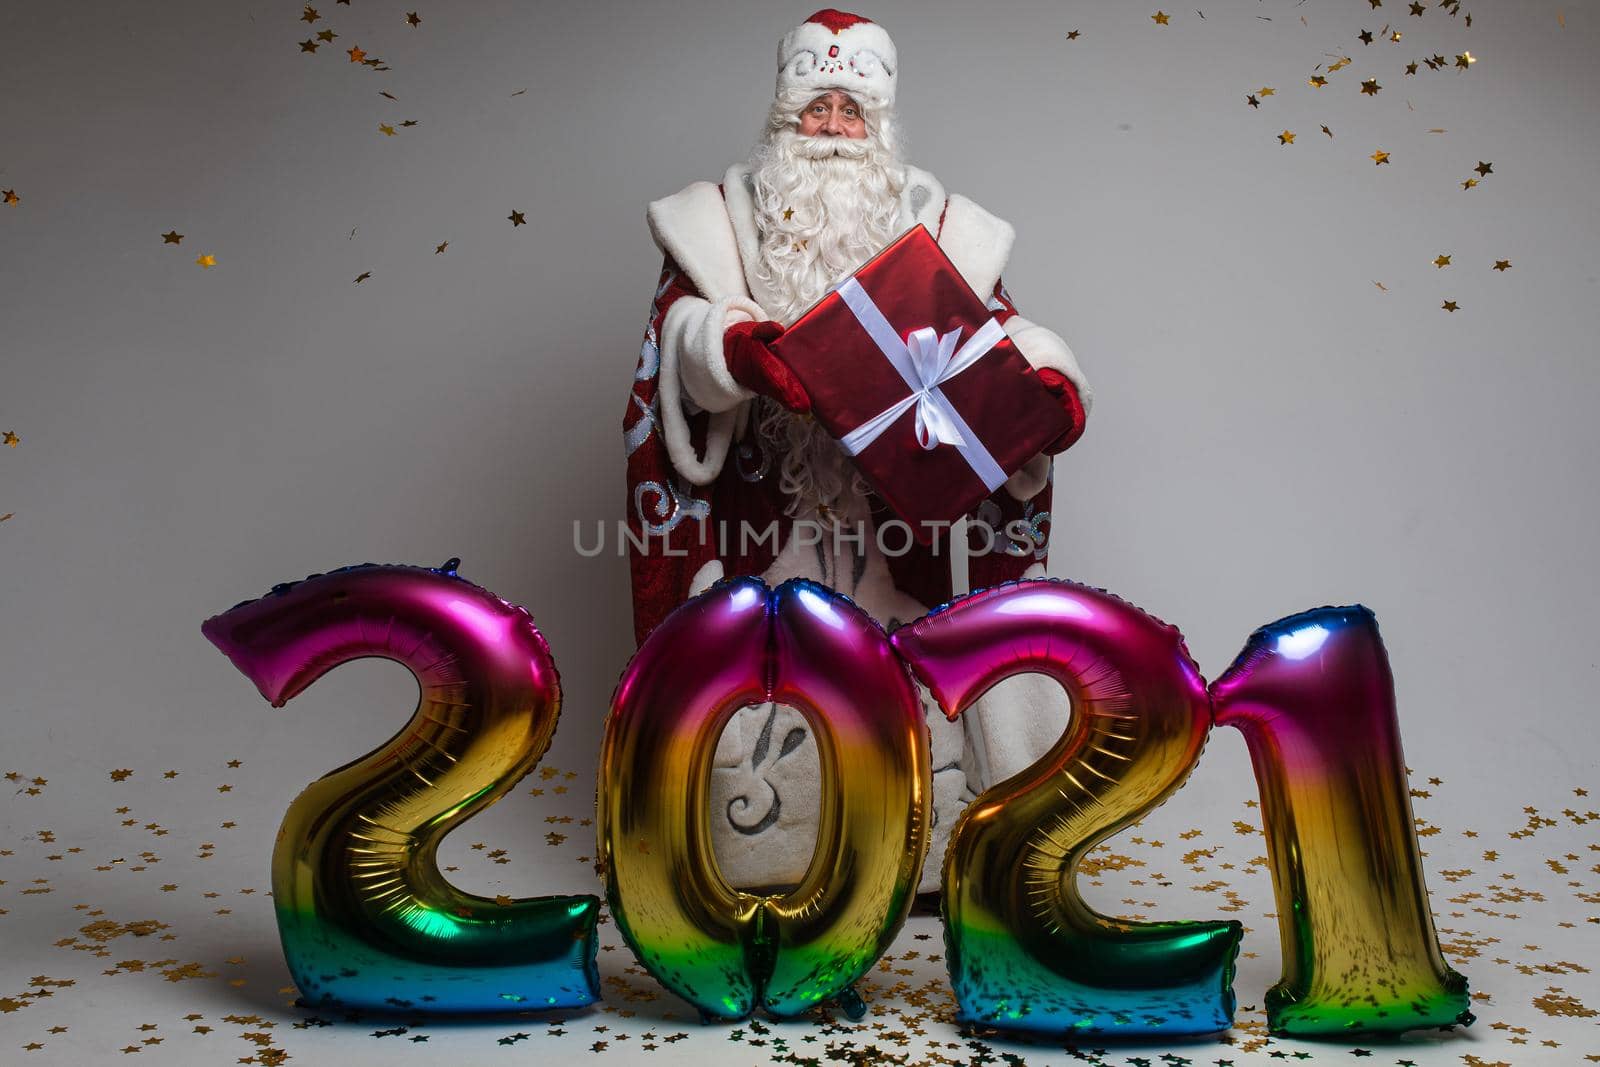 Colourful balloons in shape of 2021 and Santa with gift celebrating xmas and new year. High quality photo